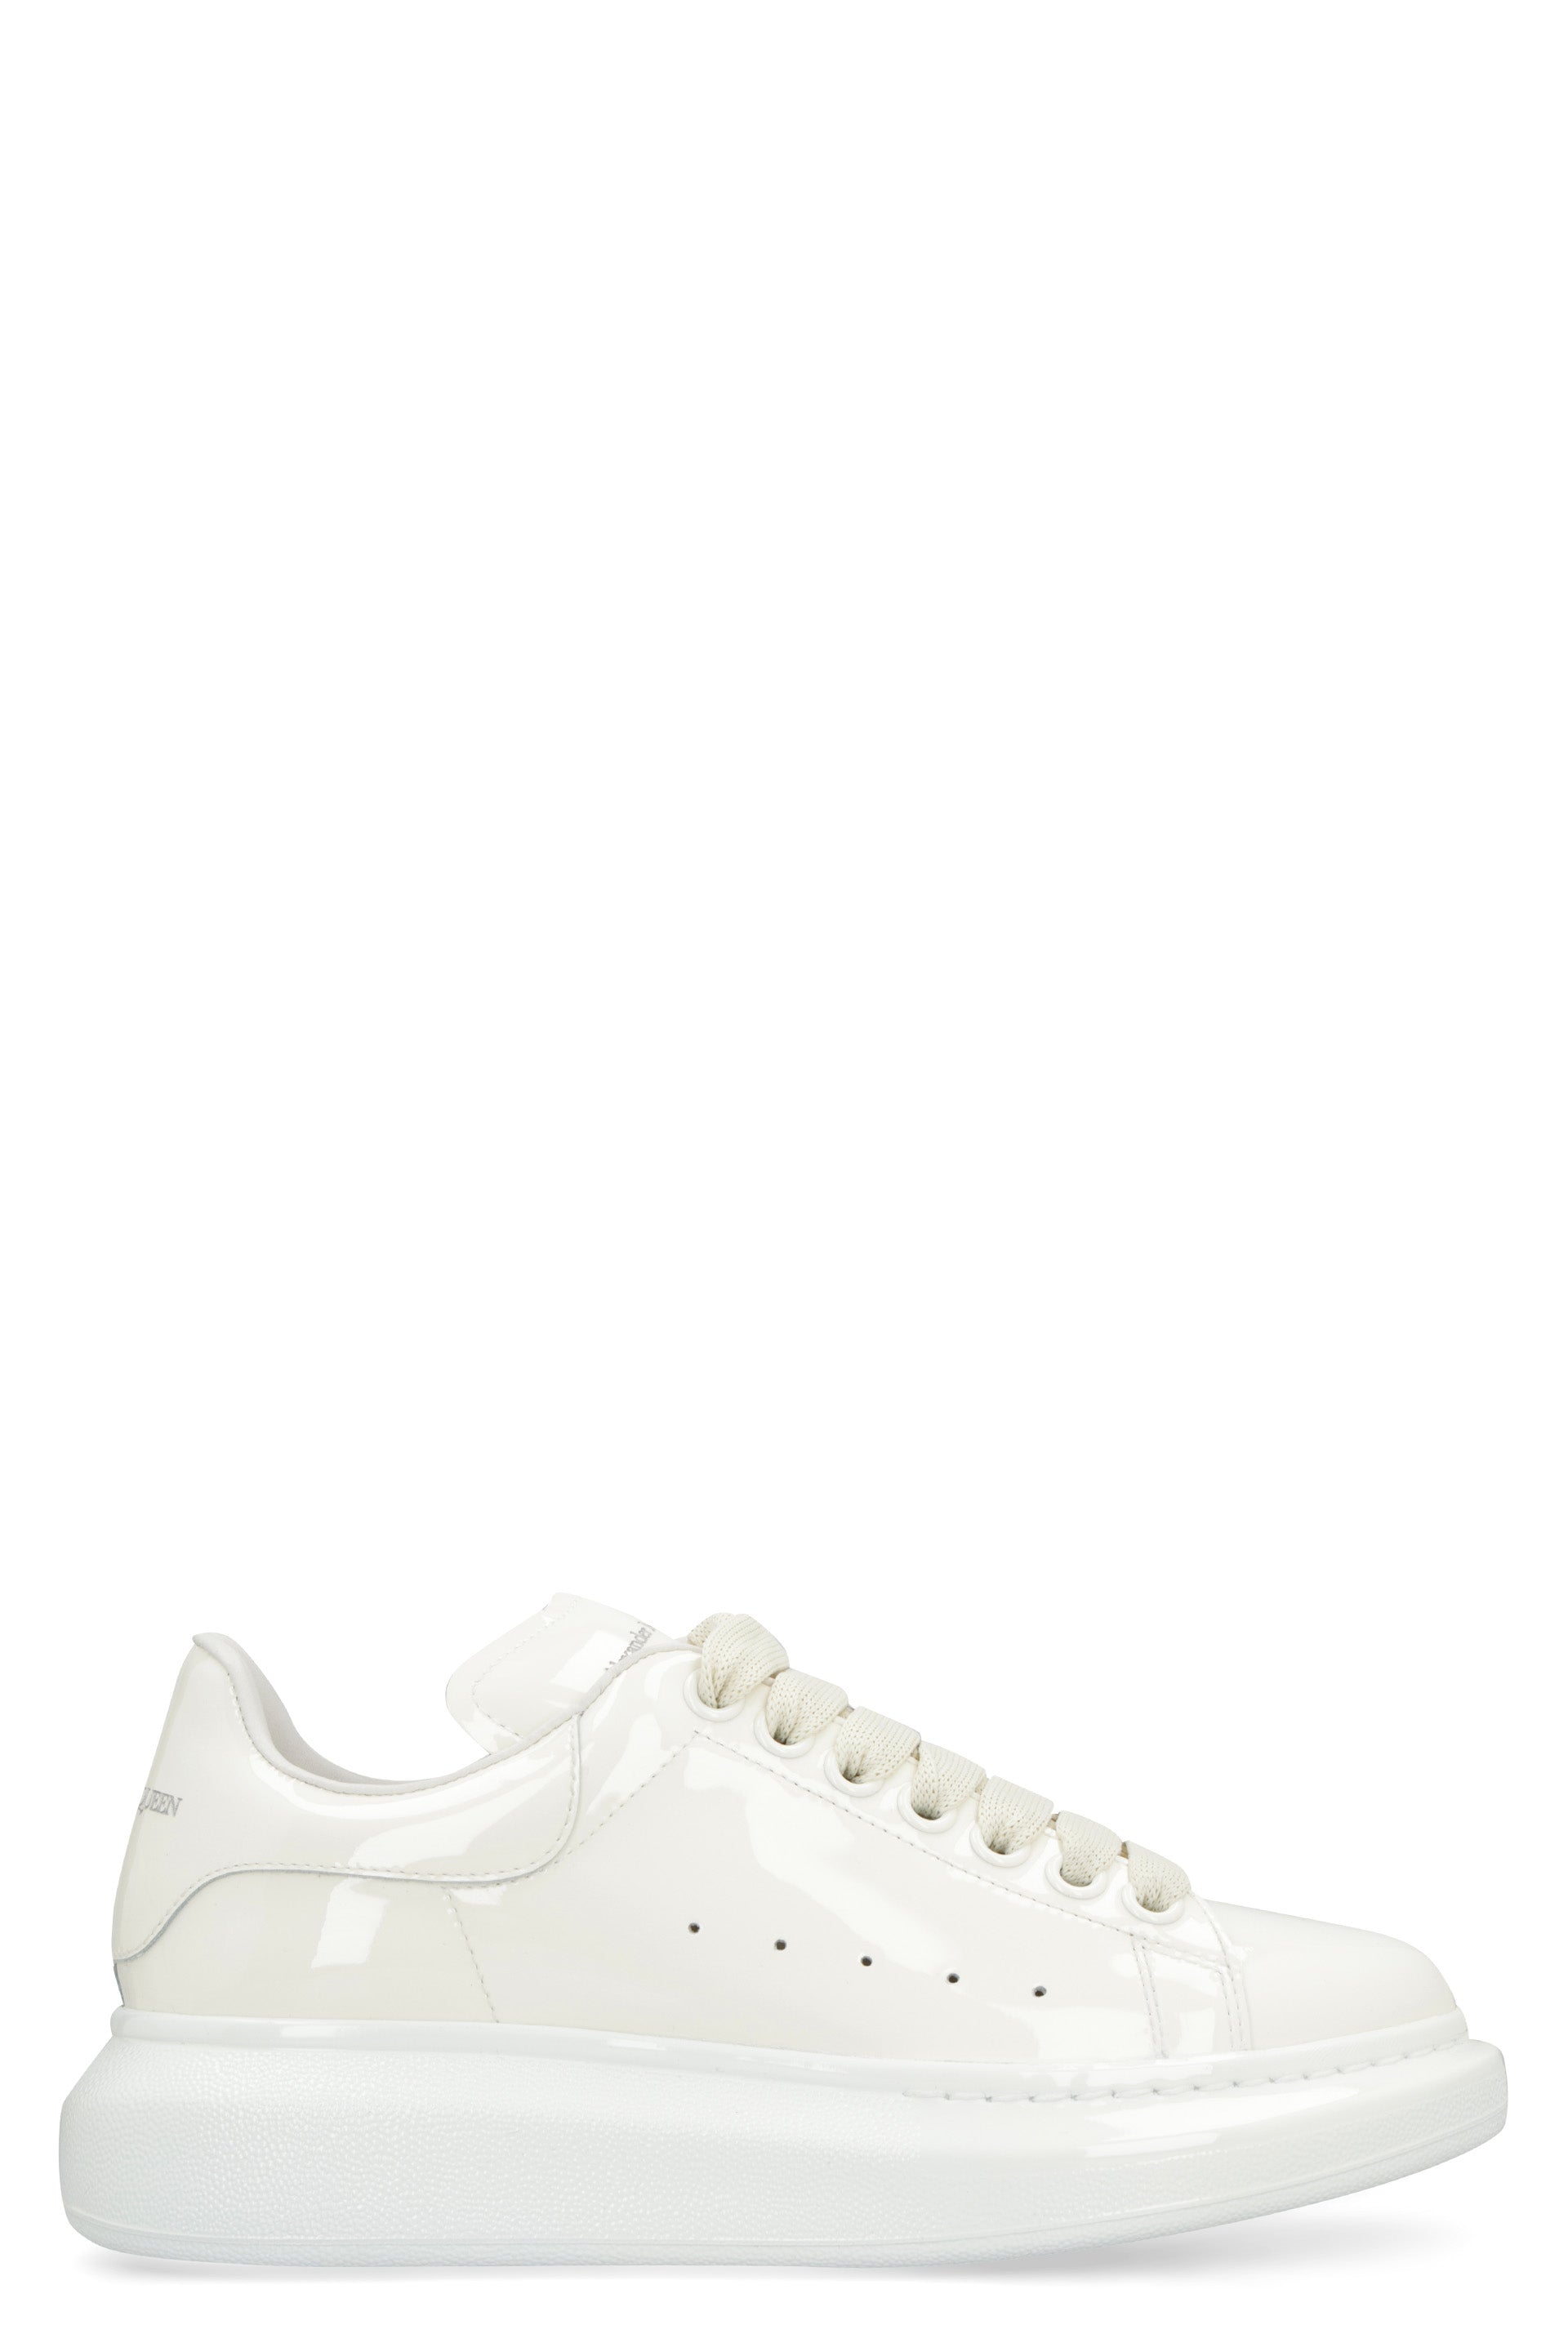 Shop Alexander Mcqueen Chunky Sole White Leather Sneakers For Women